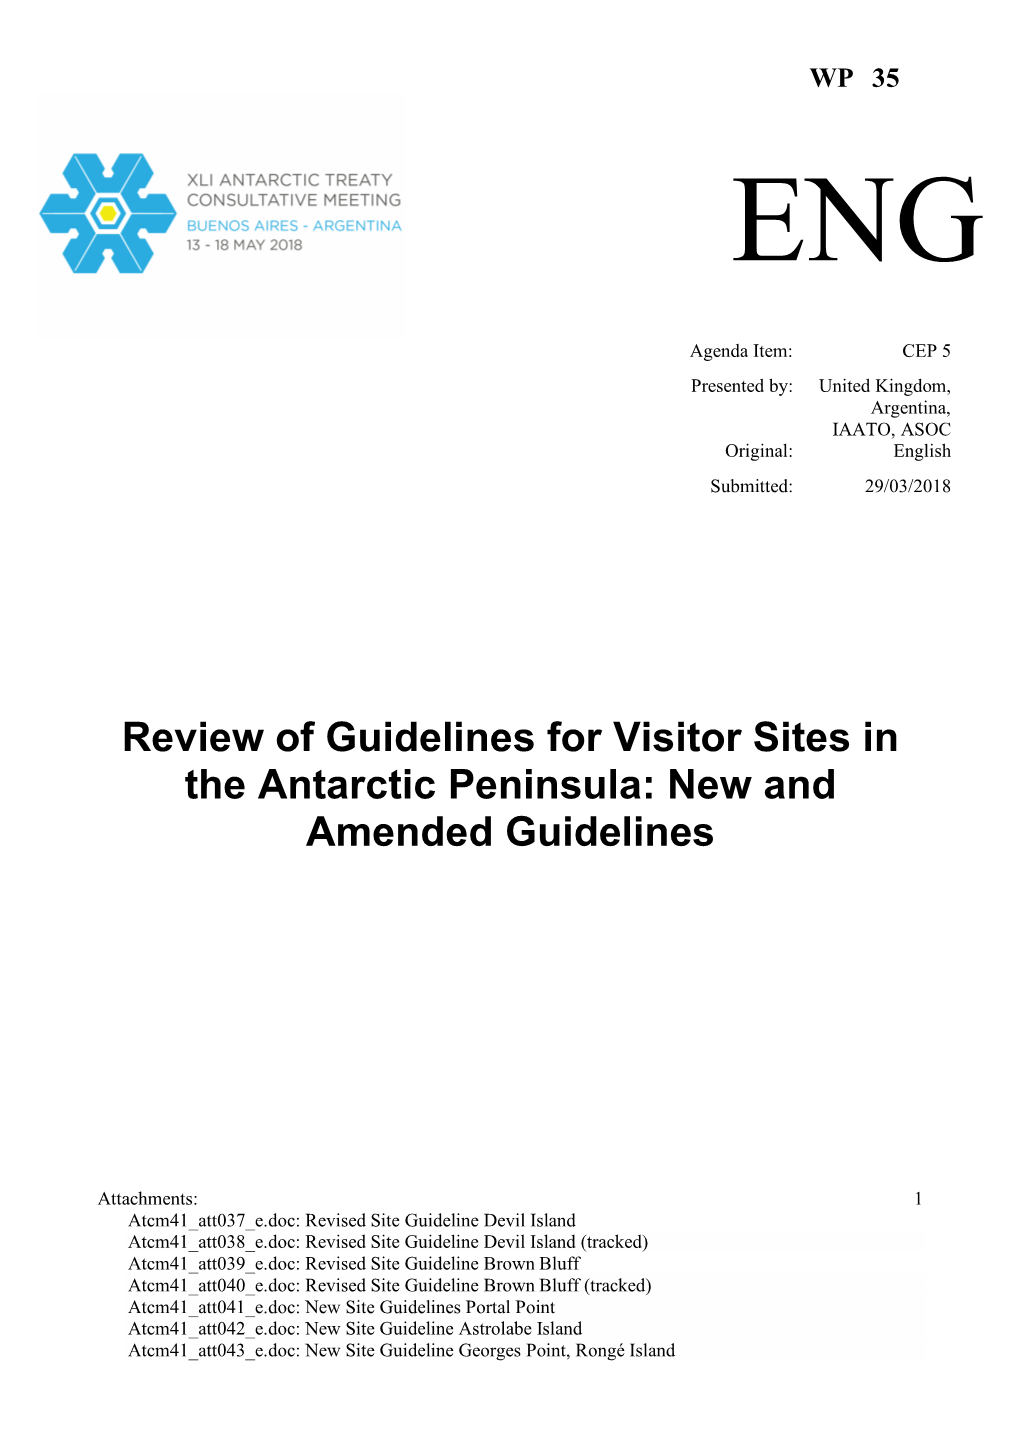 Review of Guidelines for Visitor Sites in the Antarctic Peninsula: New and Amended Guidelines